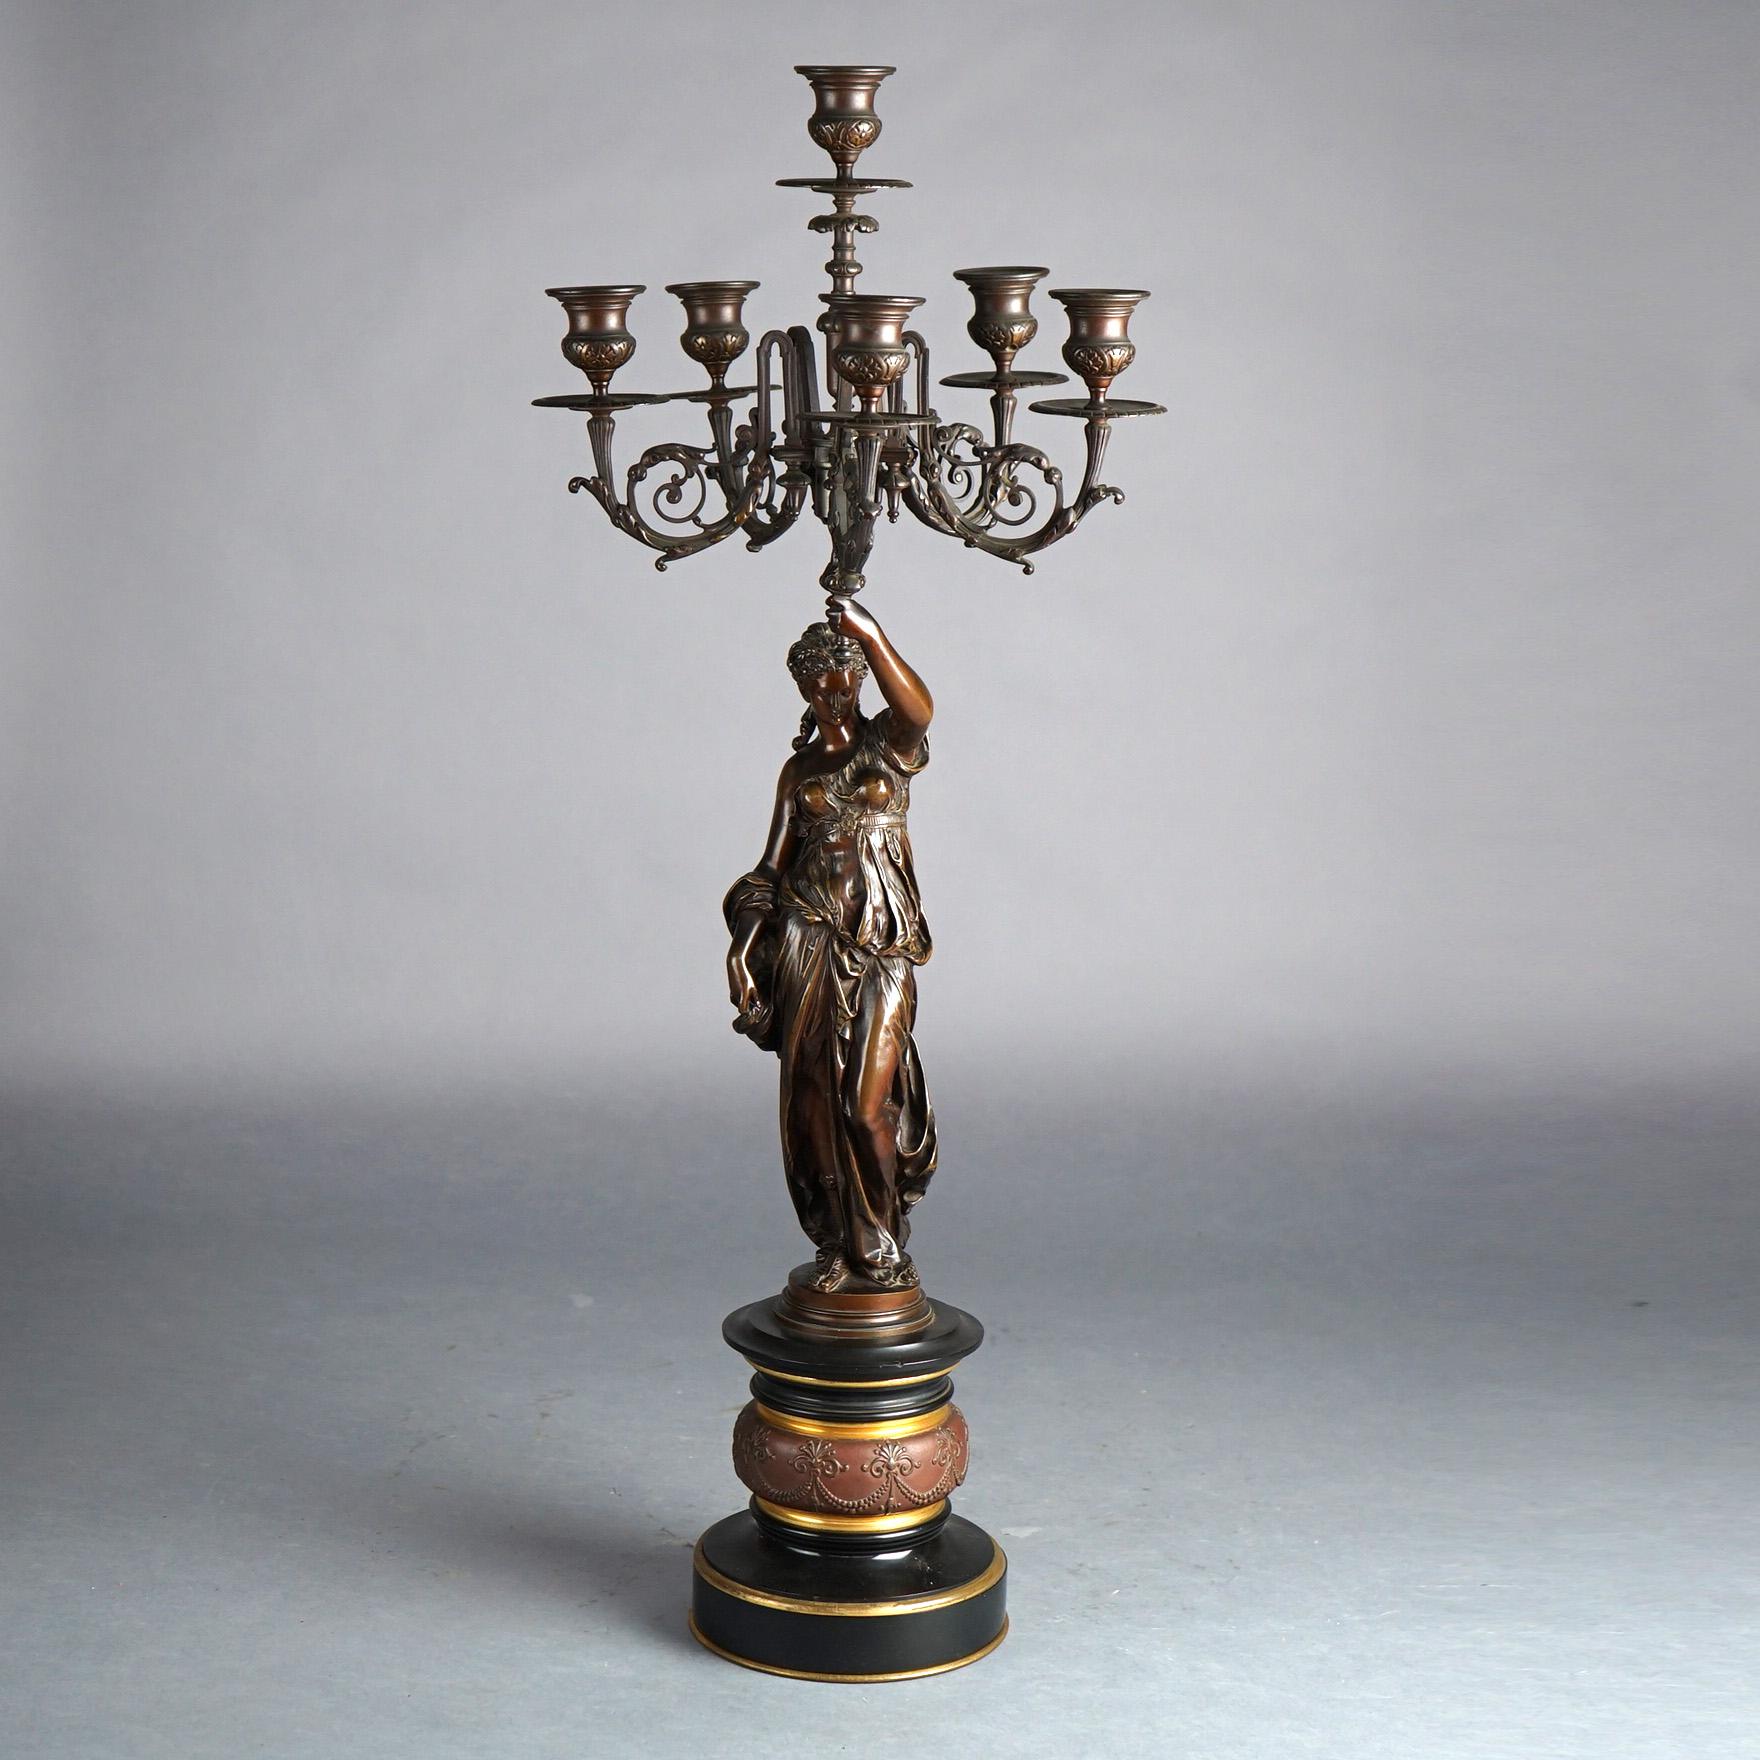 An antique Renaissance Revival figural garniture set offers central slate clock with mother daughter or sisters bronzed sculpture signed Paul Dubois (French, 1829-1905) and matching pair of figural torchiere candelabra depicting bridal party or